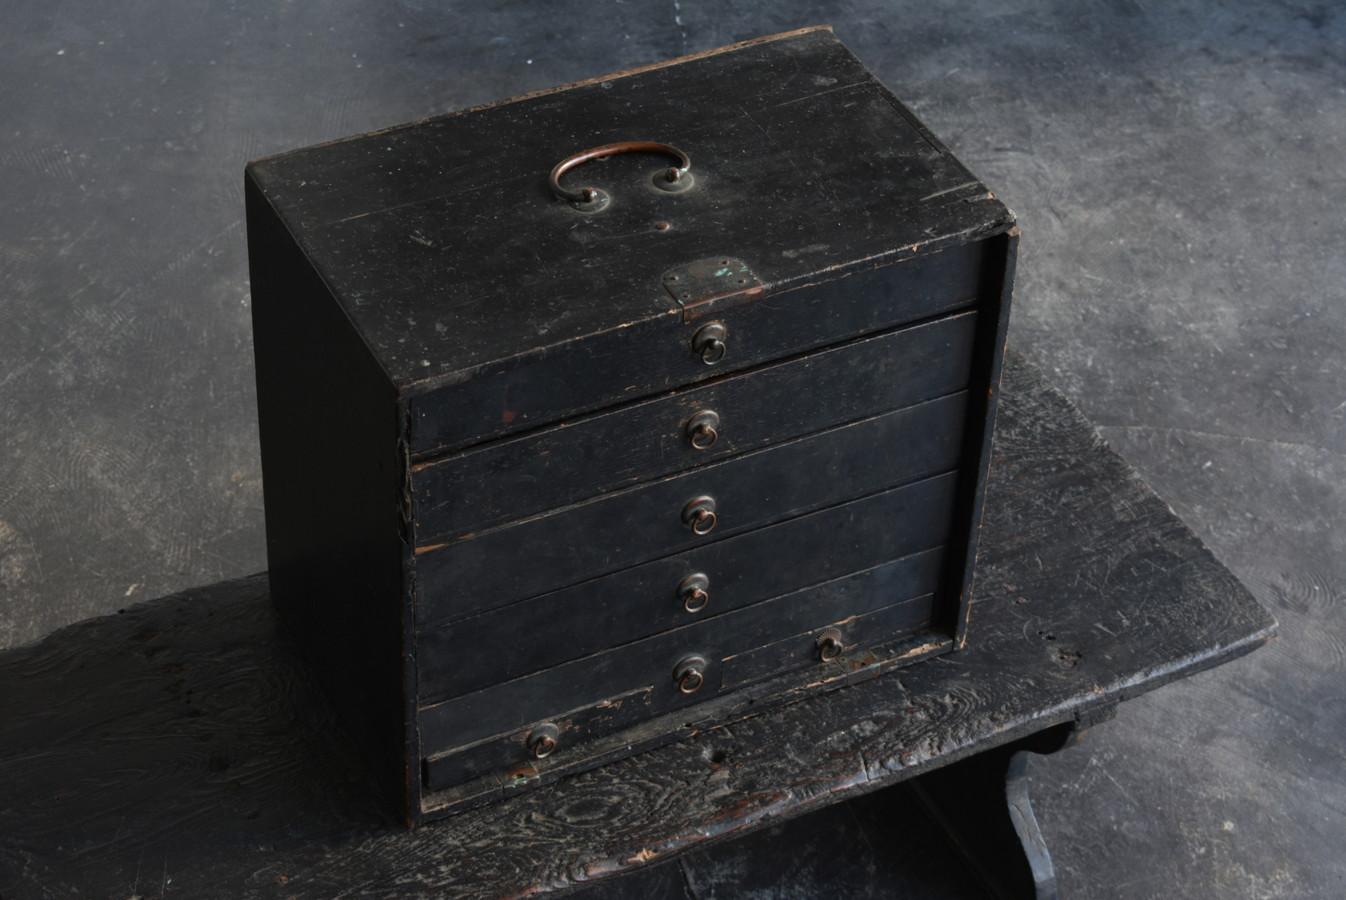 A very old Japanese small drawer.
It is from the late Edo period to the Meiji period (1800s to 1900s).
The material is made of cedar wood.
The round handle is made of copper.
The whole is painted black with lacquer.

The design is simple and